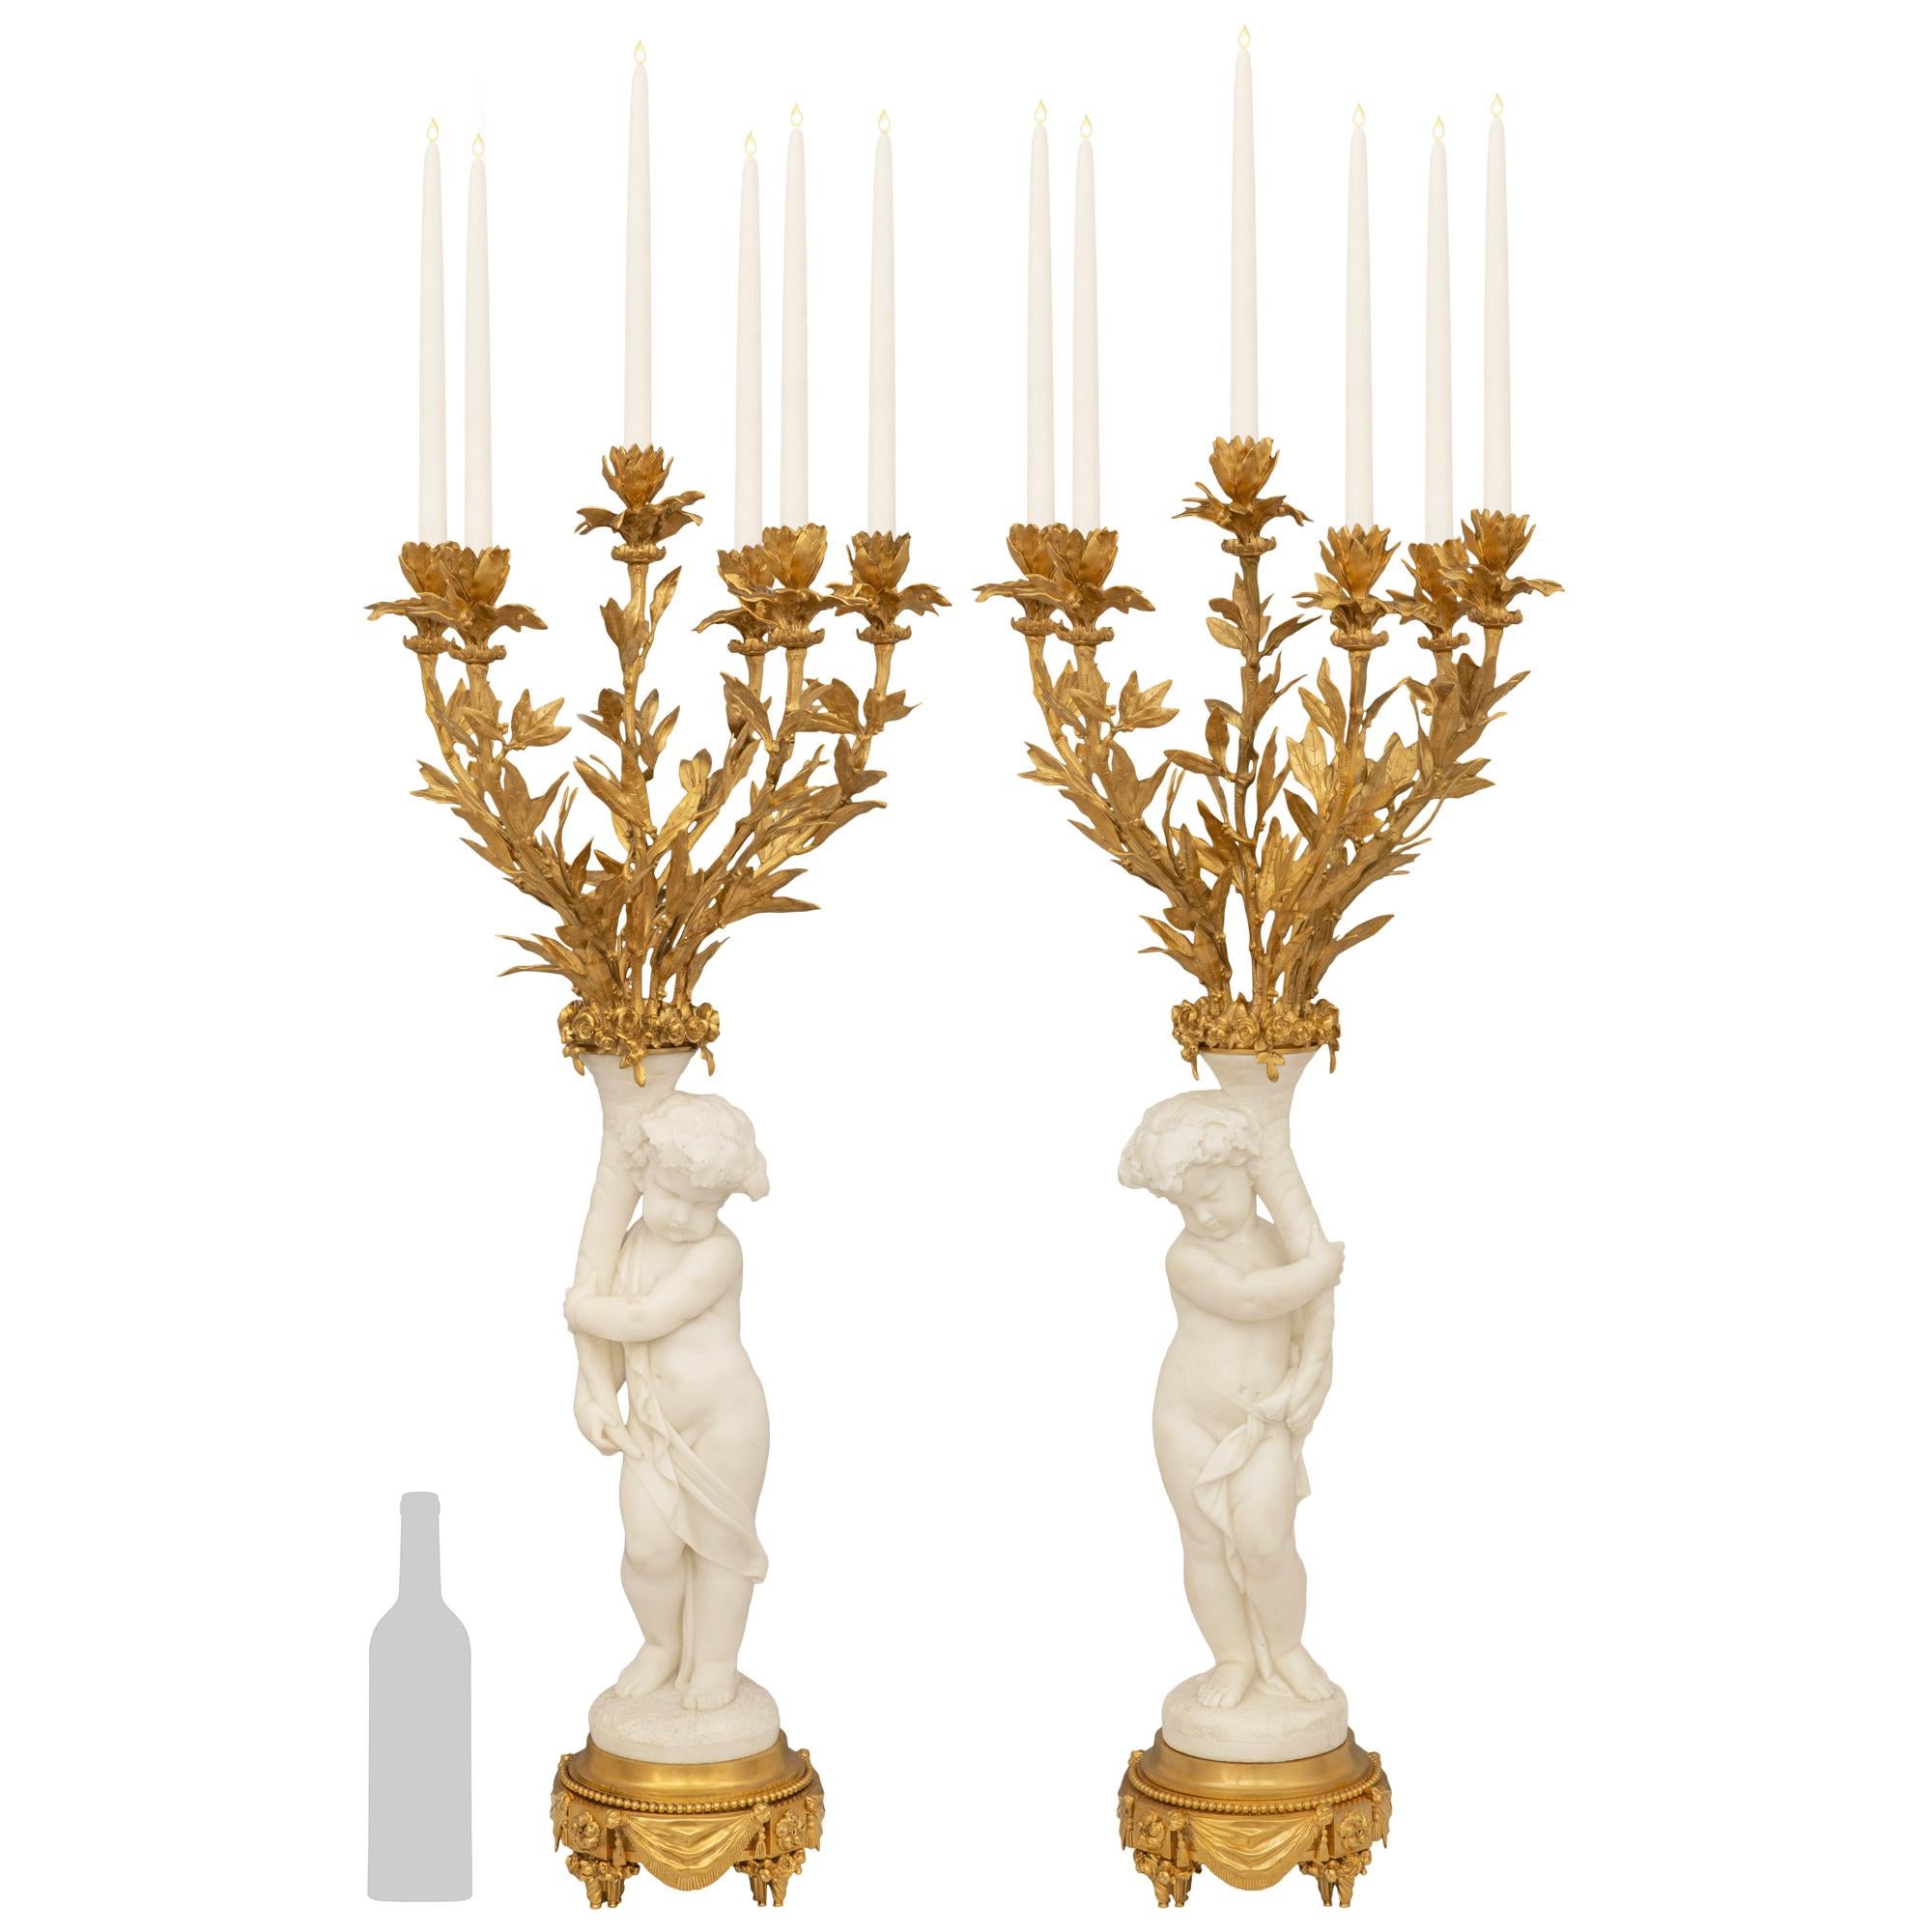 An exquisite and finely detailed pair of French 19th century Louis XVI st. white Carrara marble and Ormolu candelabras. Each beautiful six arm candelabra is raised on a circular Ormolu stepped pedestal decorated by swaging garments, foliate designs,